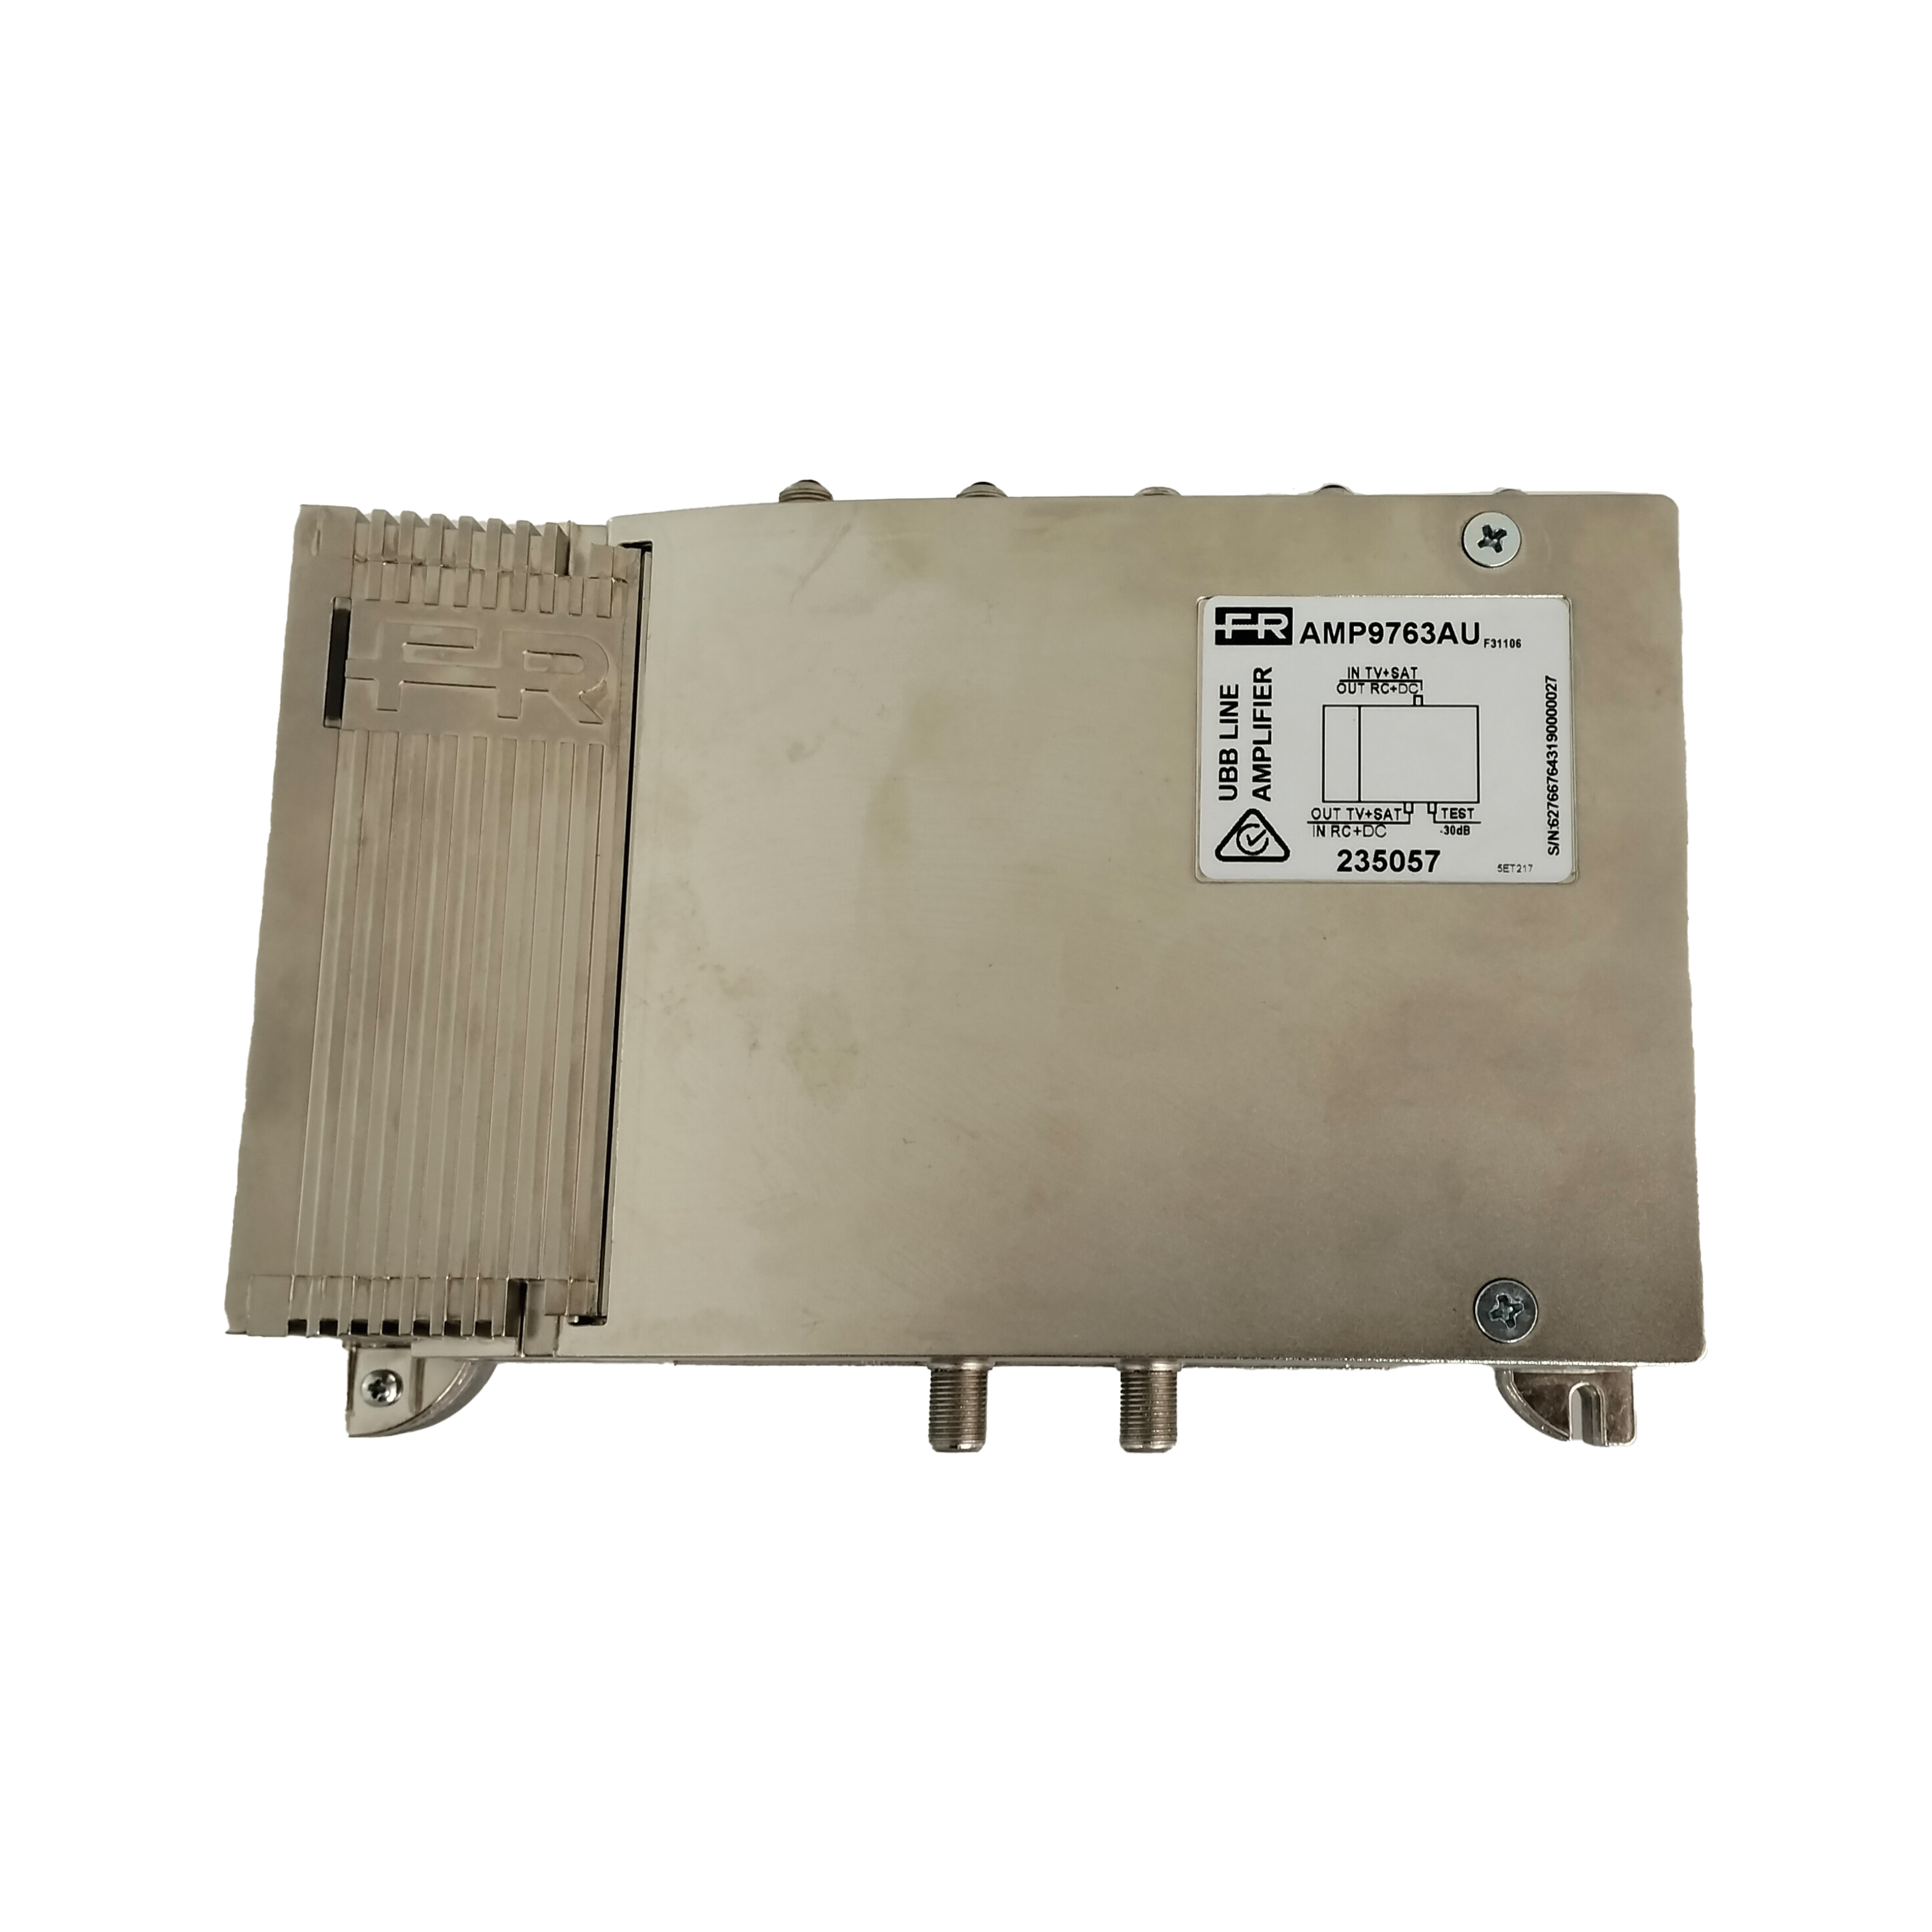 FRACARRO UBB Line Amplifier 40dB Gain with Return Path. - Click for more info